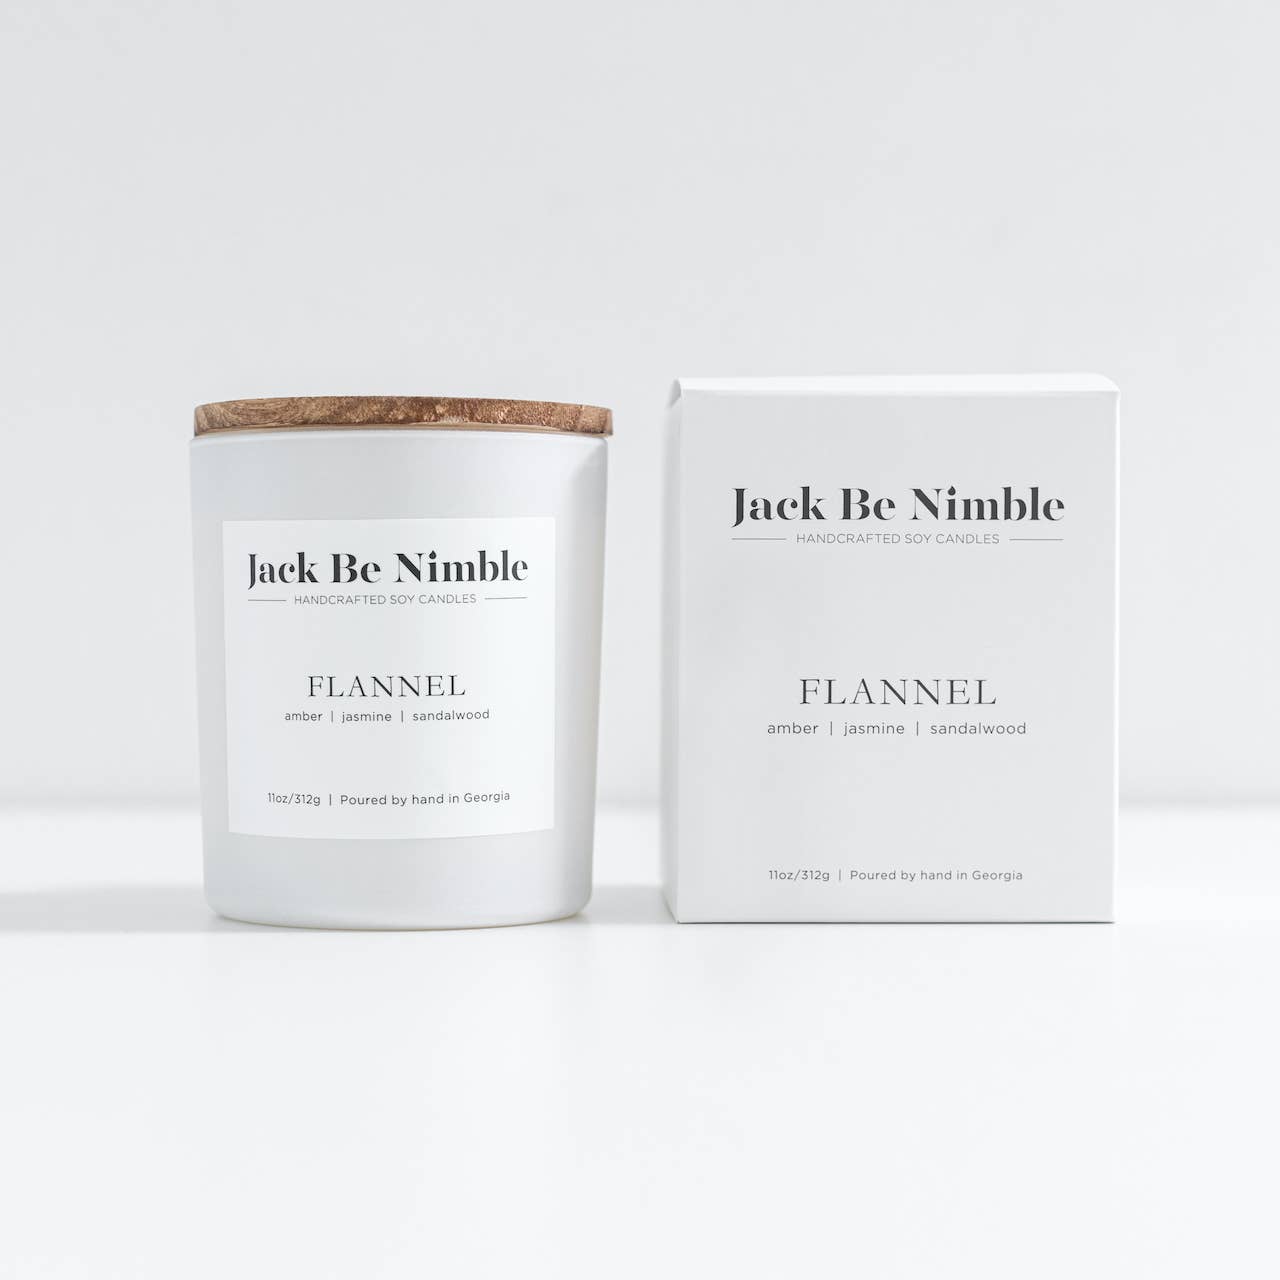 Jack Be Nimble 11oz Flannel Scented Soy Candle